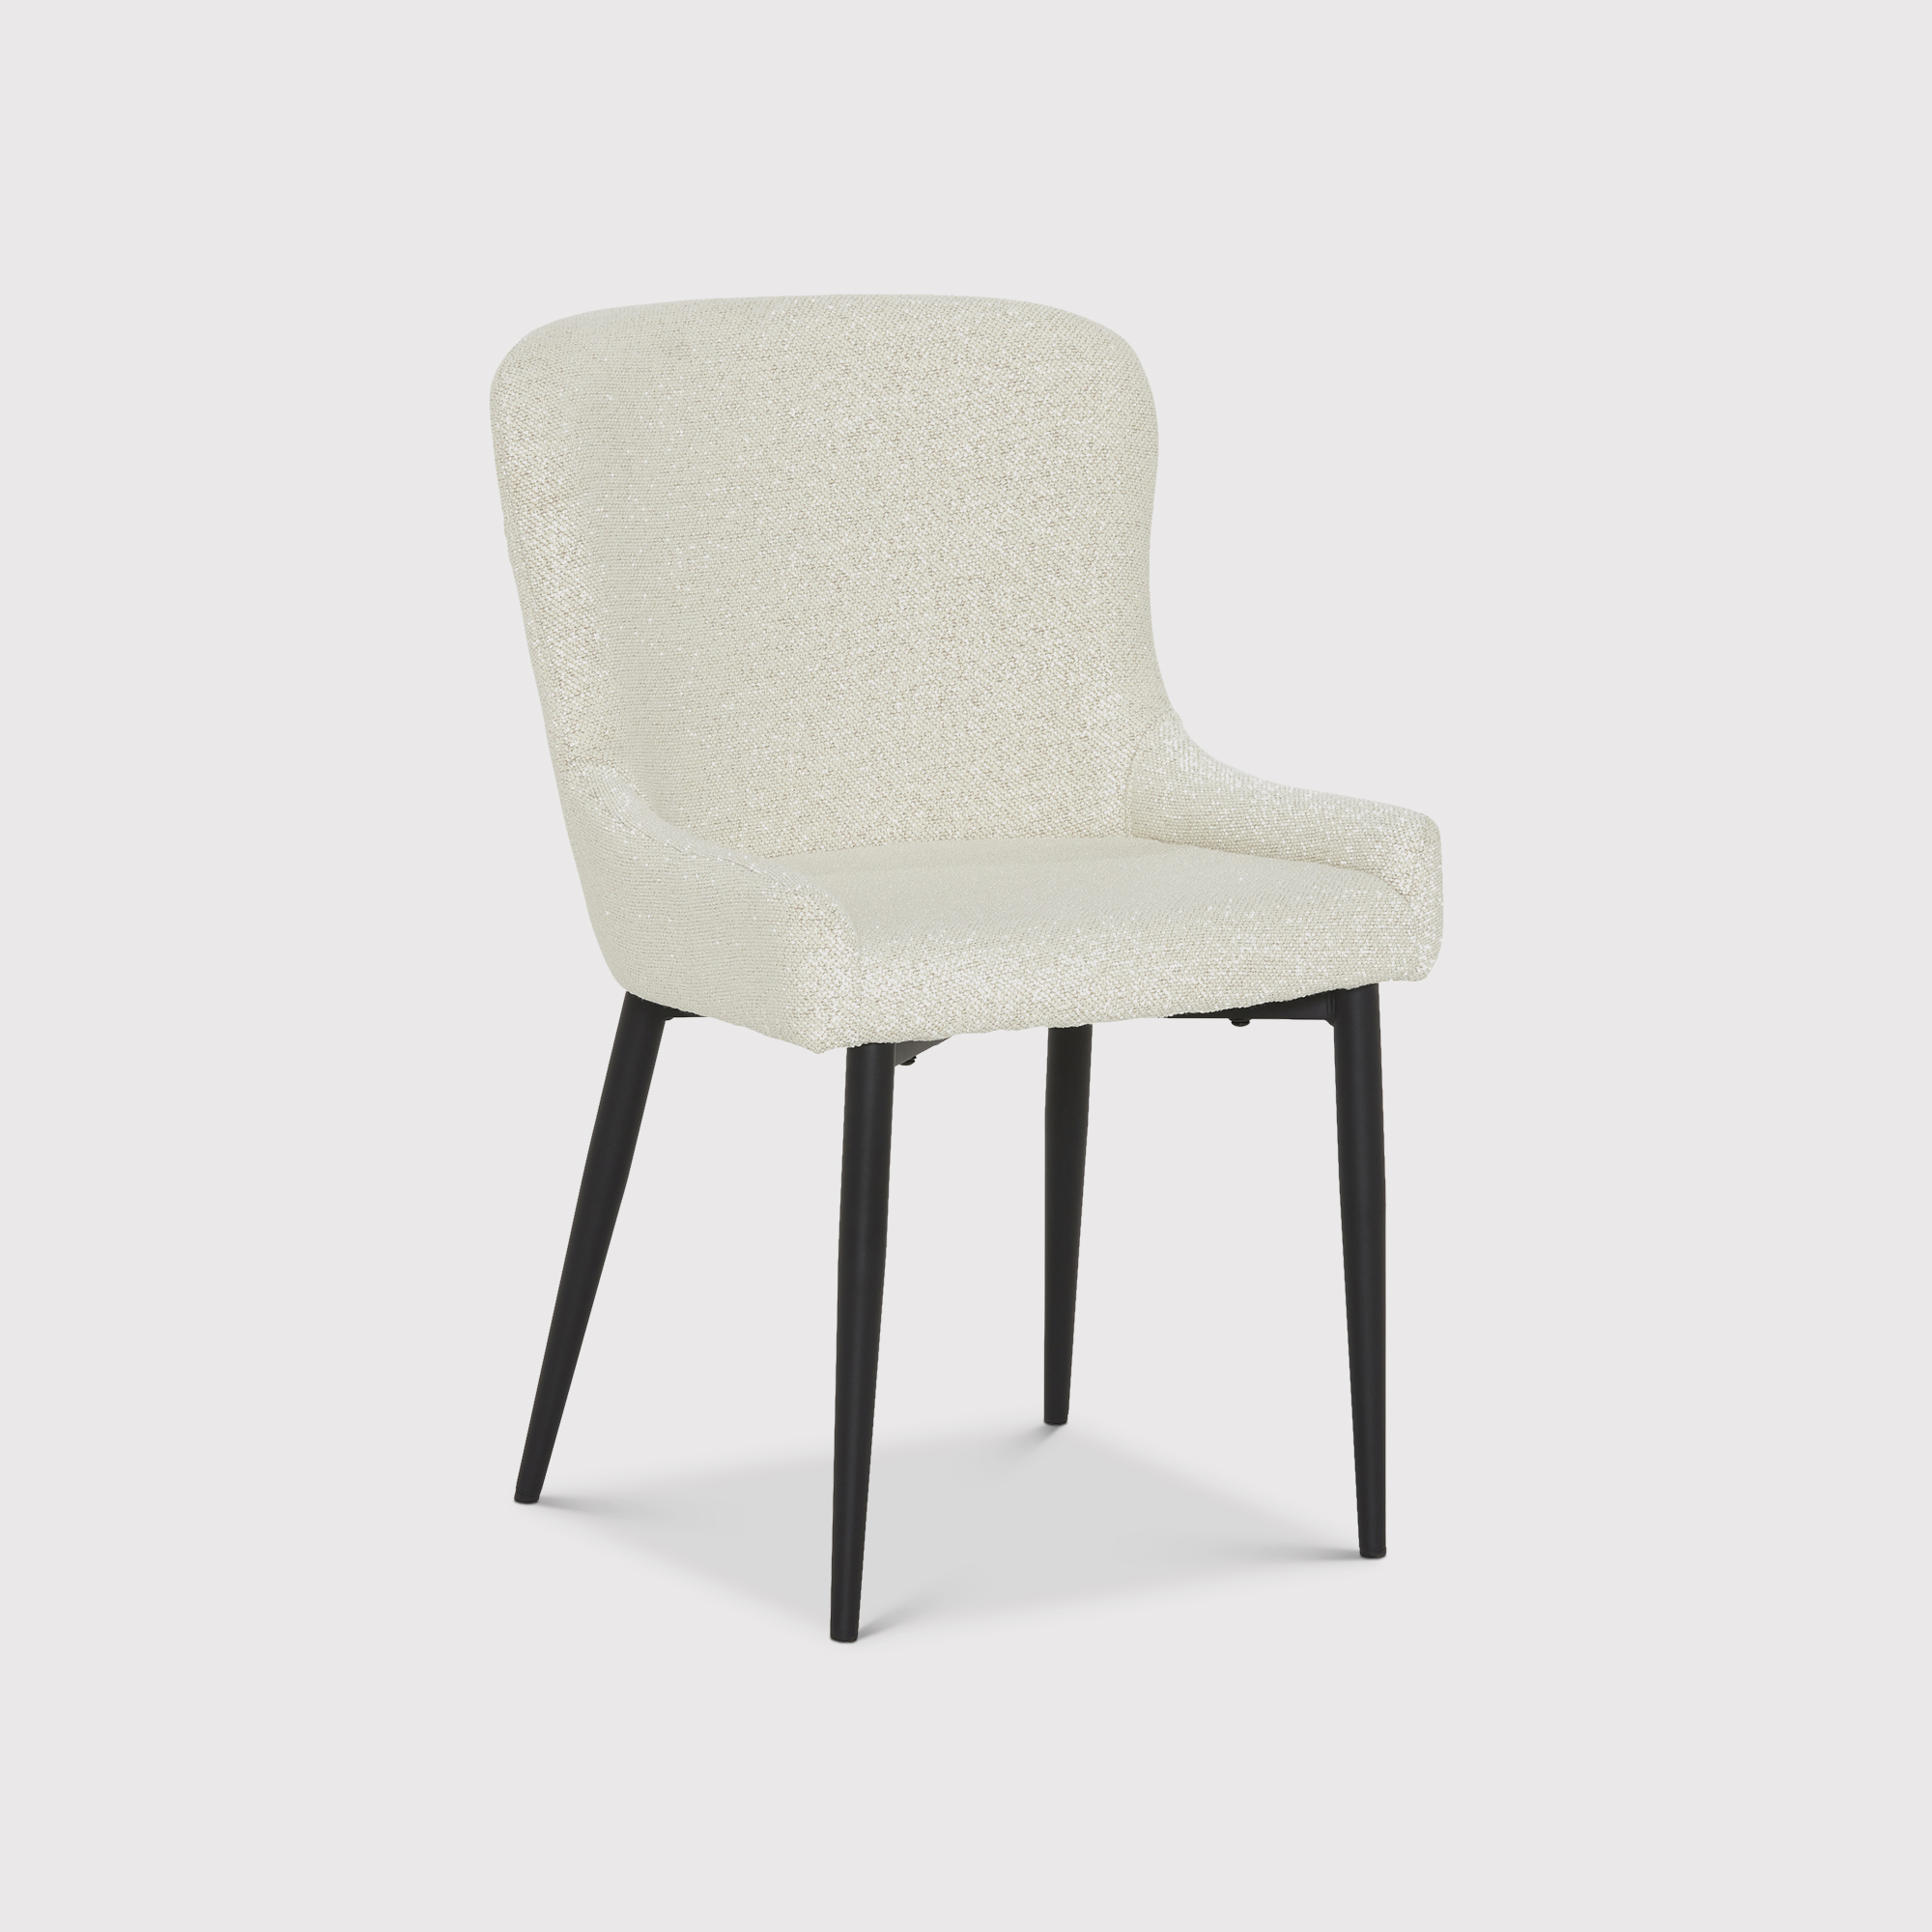 Timmins Dining Chair, Neutral | Barker & Stonehouse